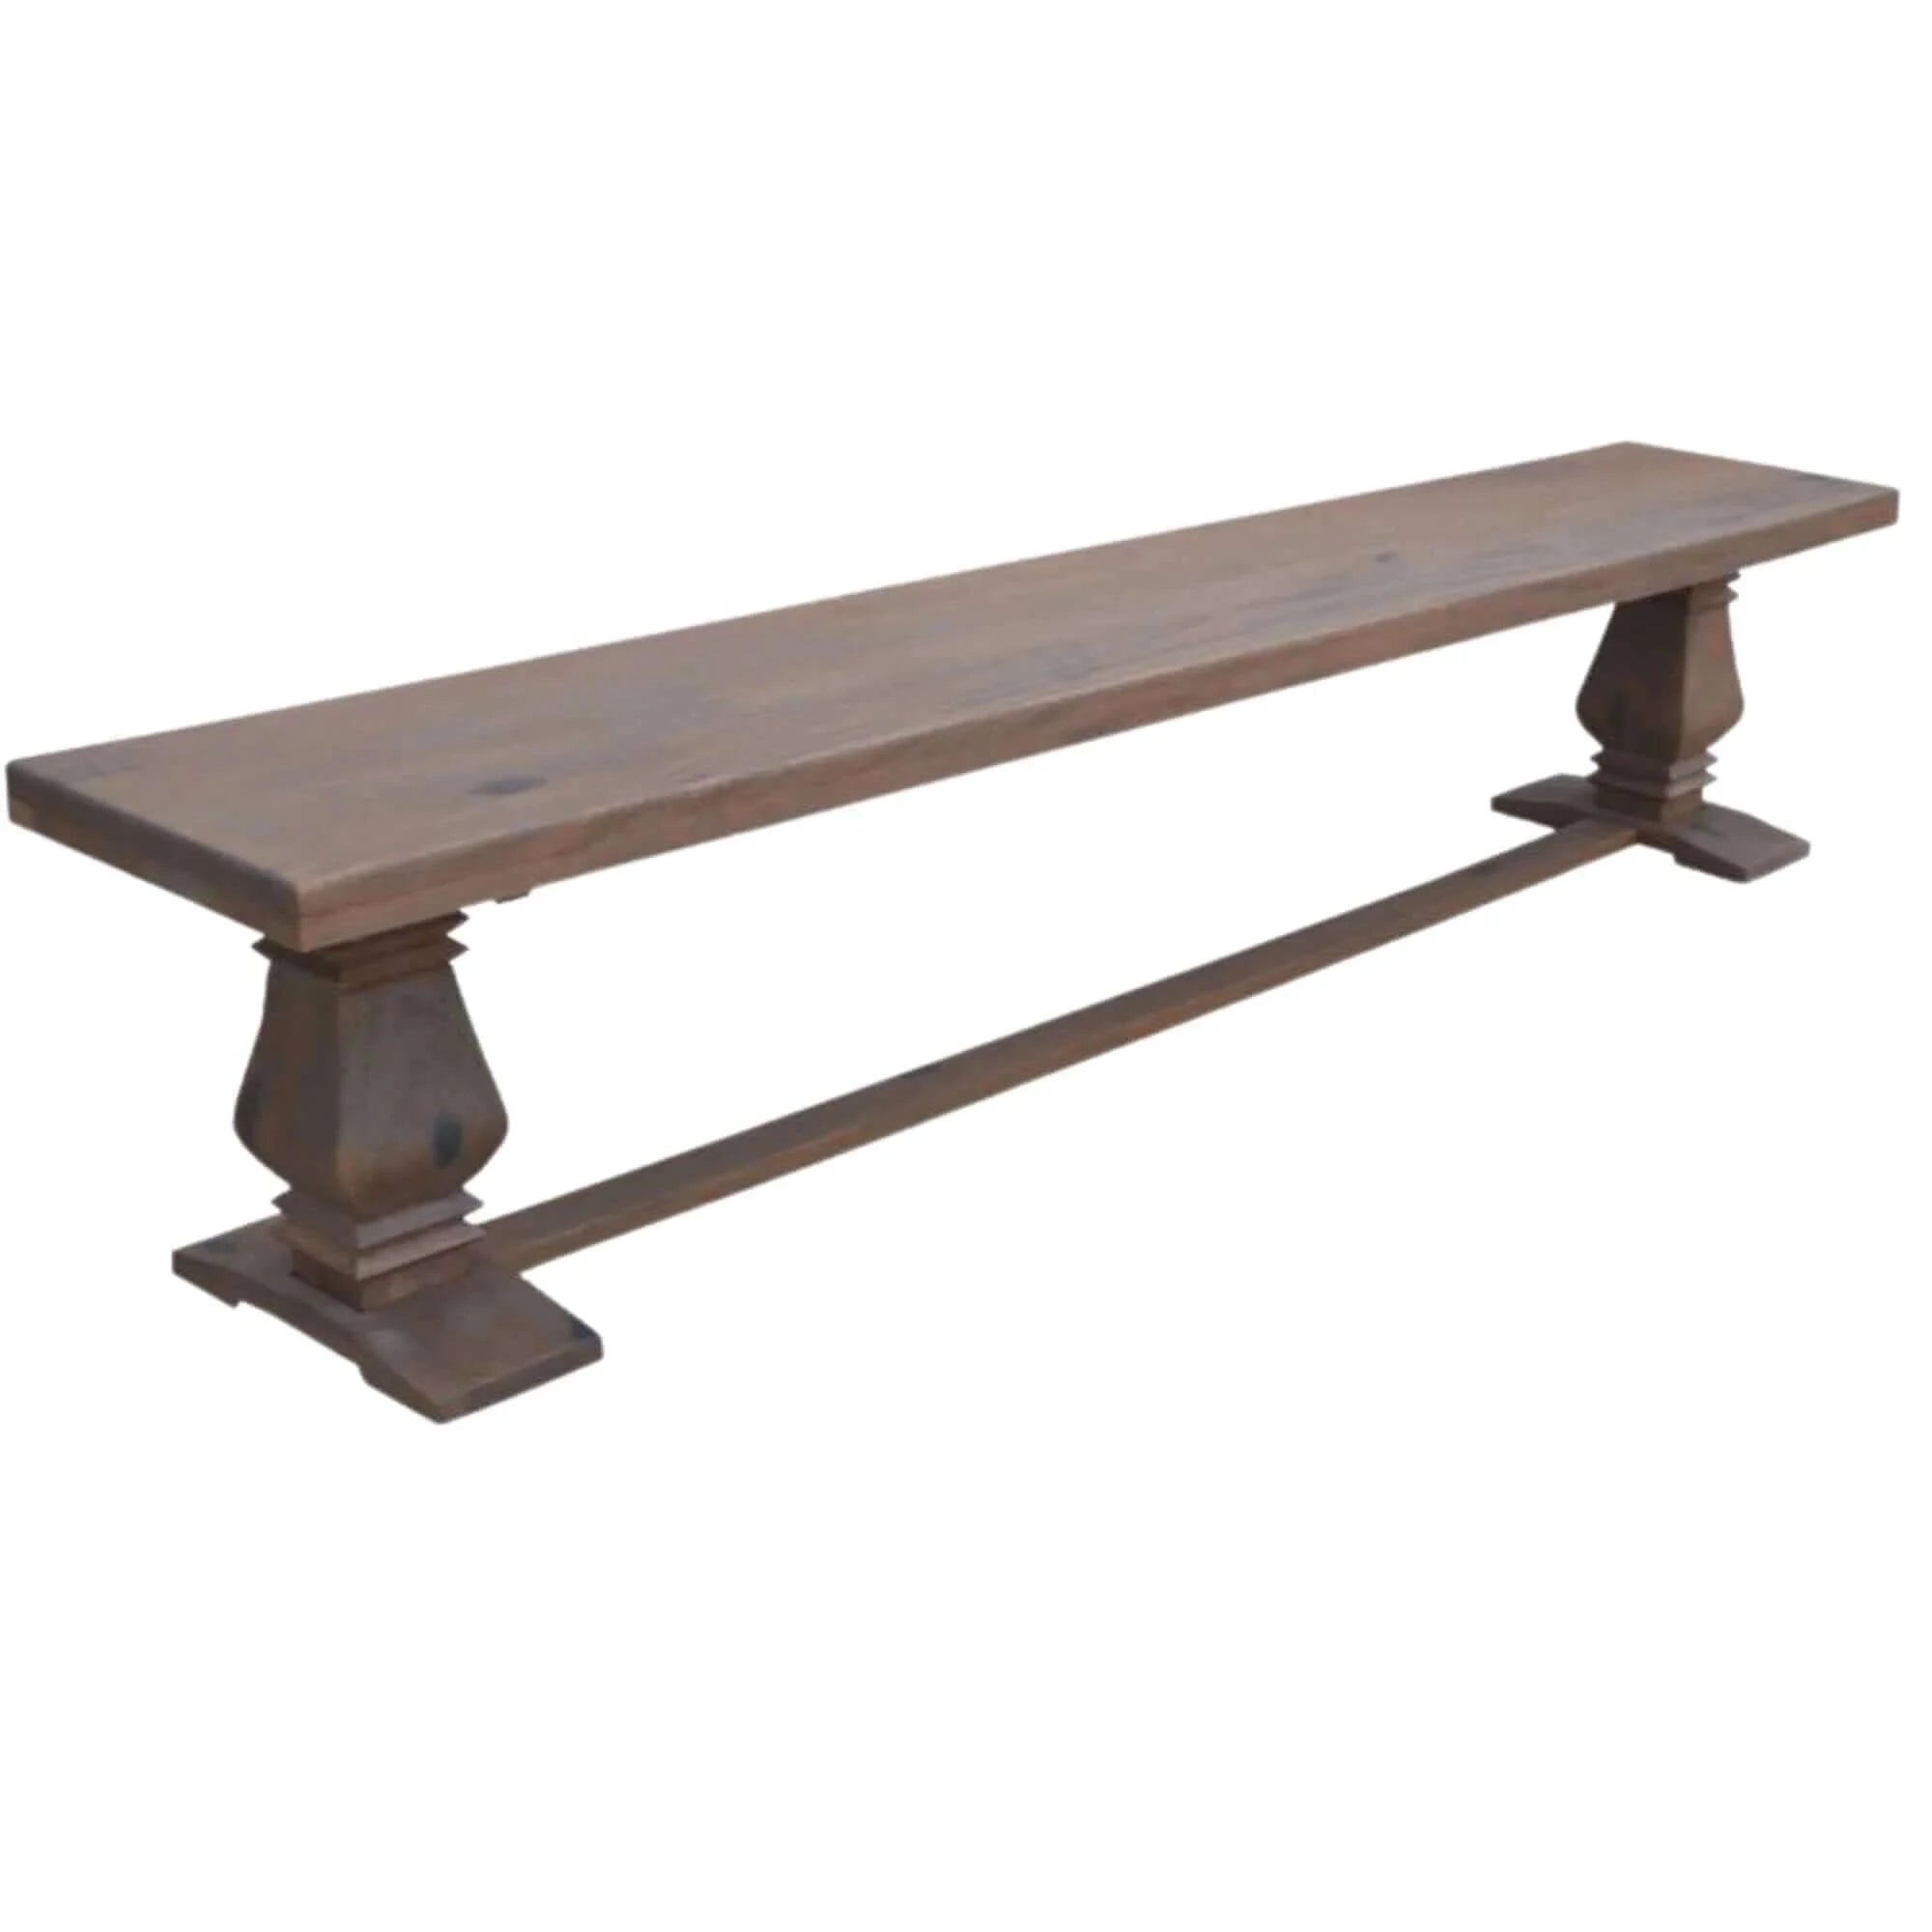 Buy florence dining table seat bench 230cm french provincial pedestal solid timber - upinteriors-Upinteriors